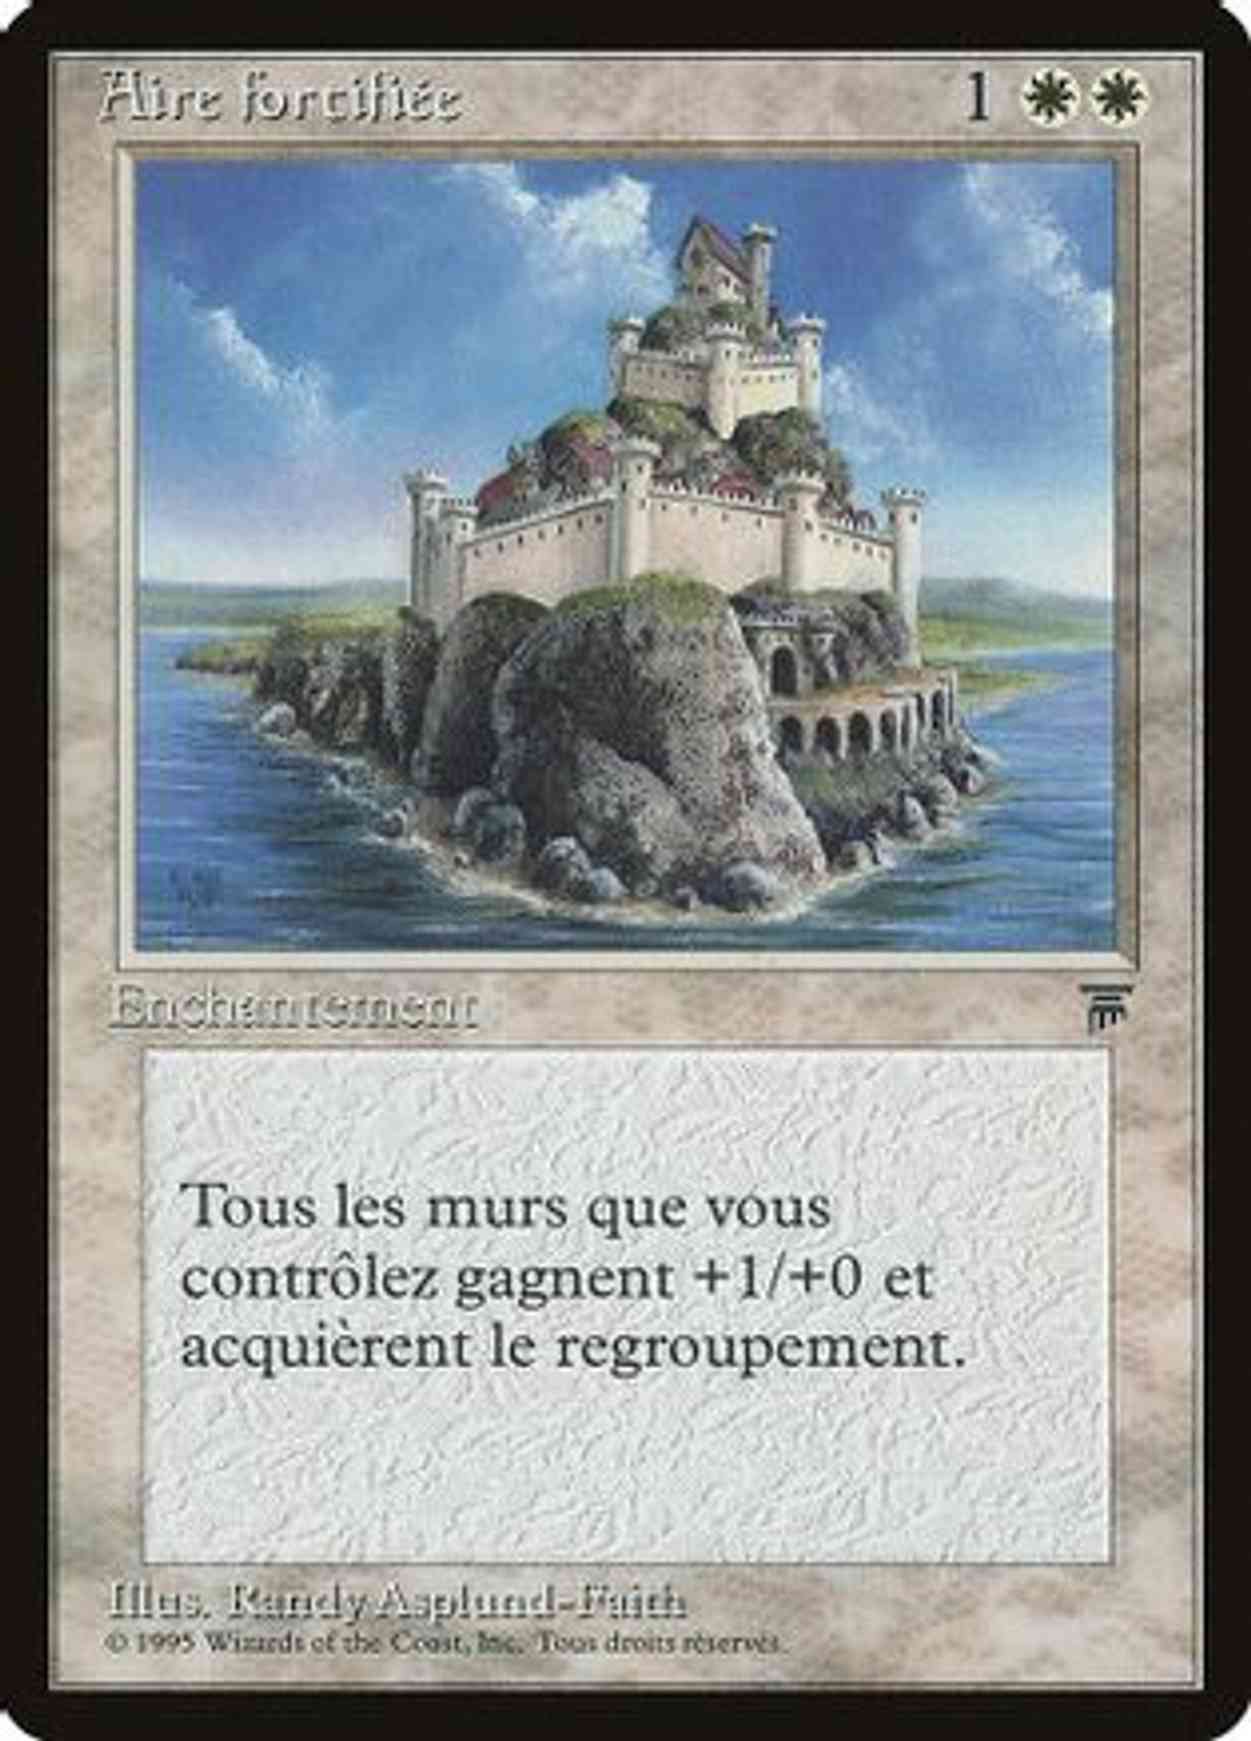 Fortified Area (French) - "Aire fortifiee" magic card front